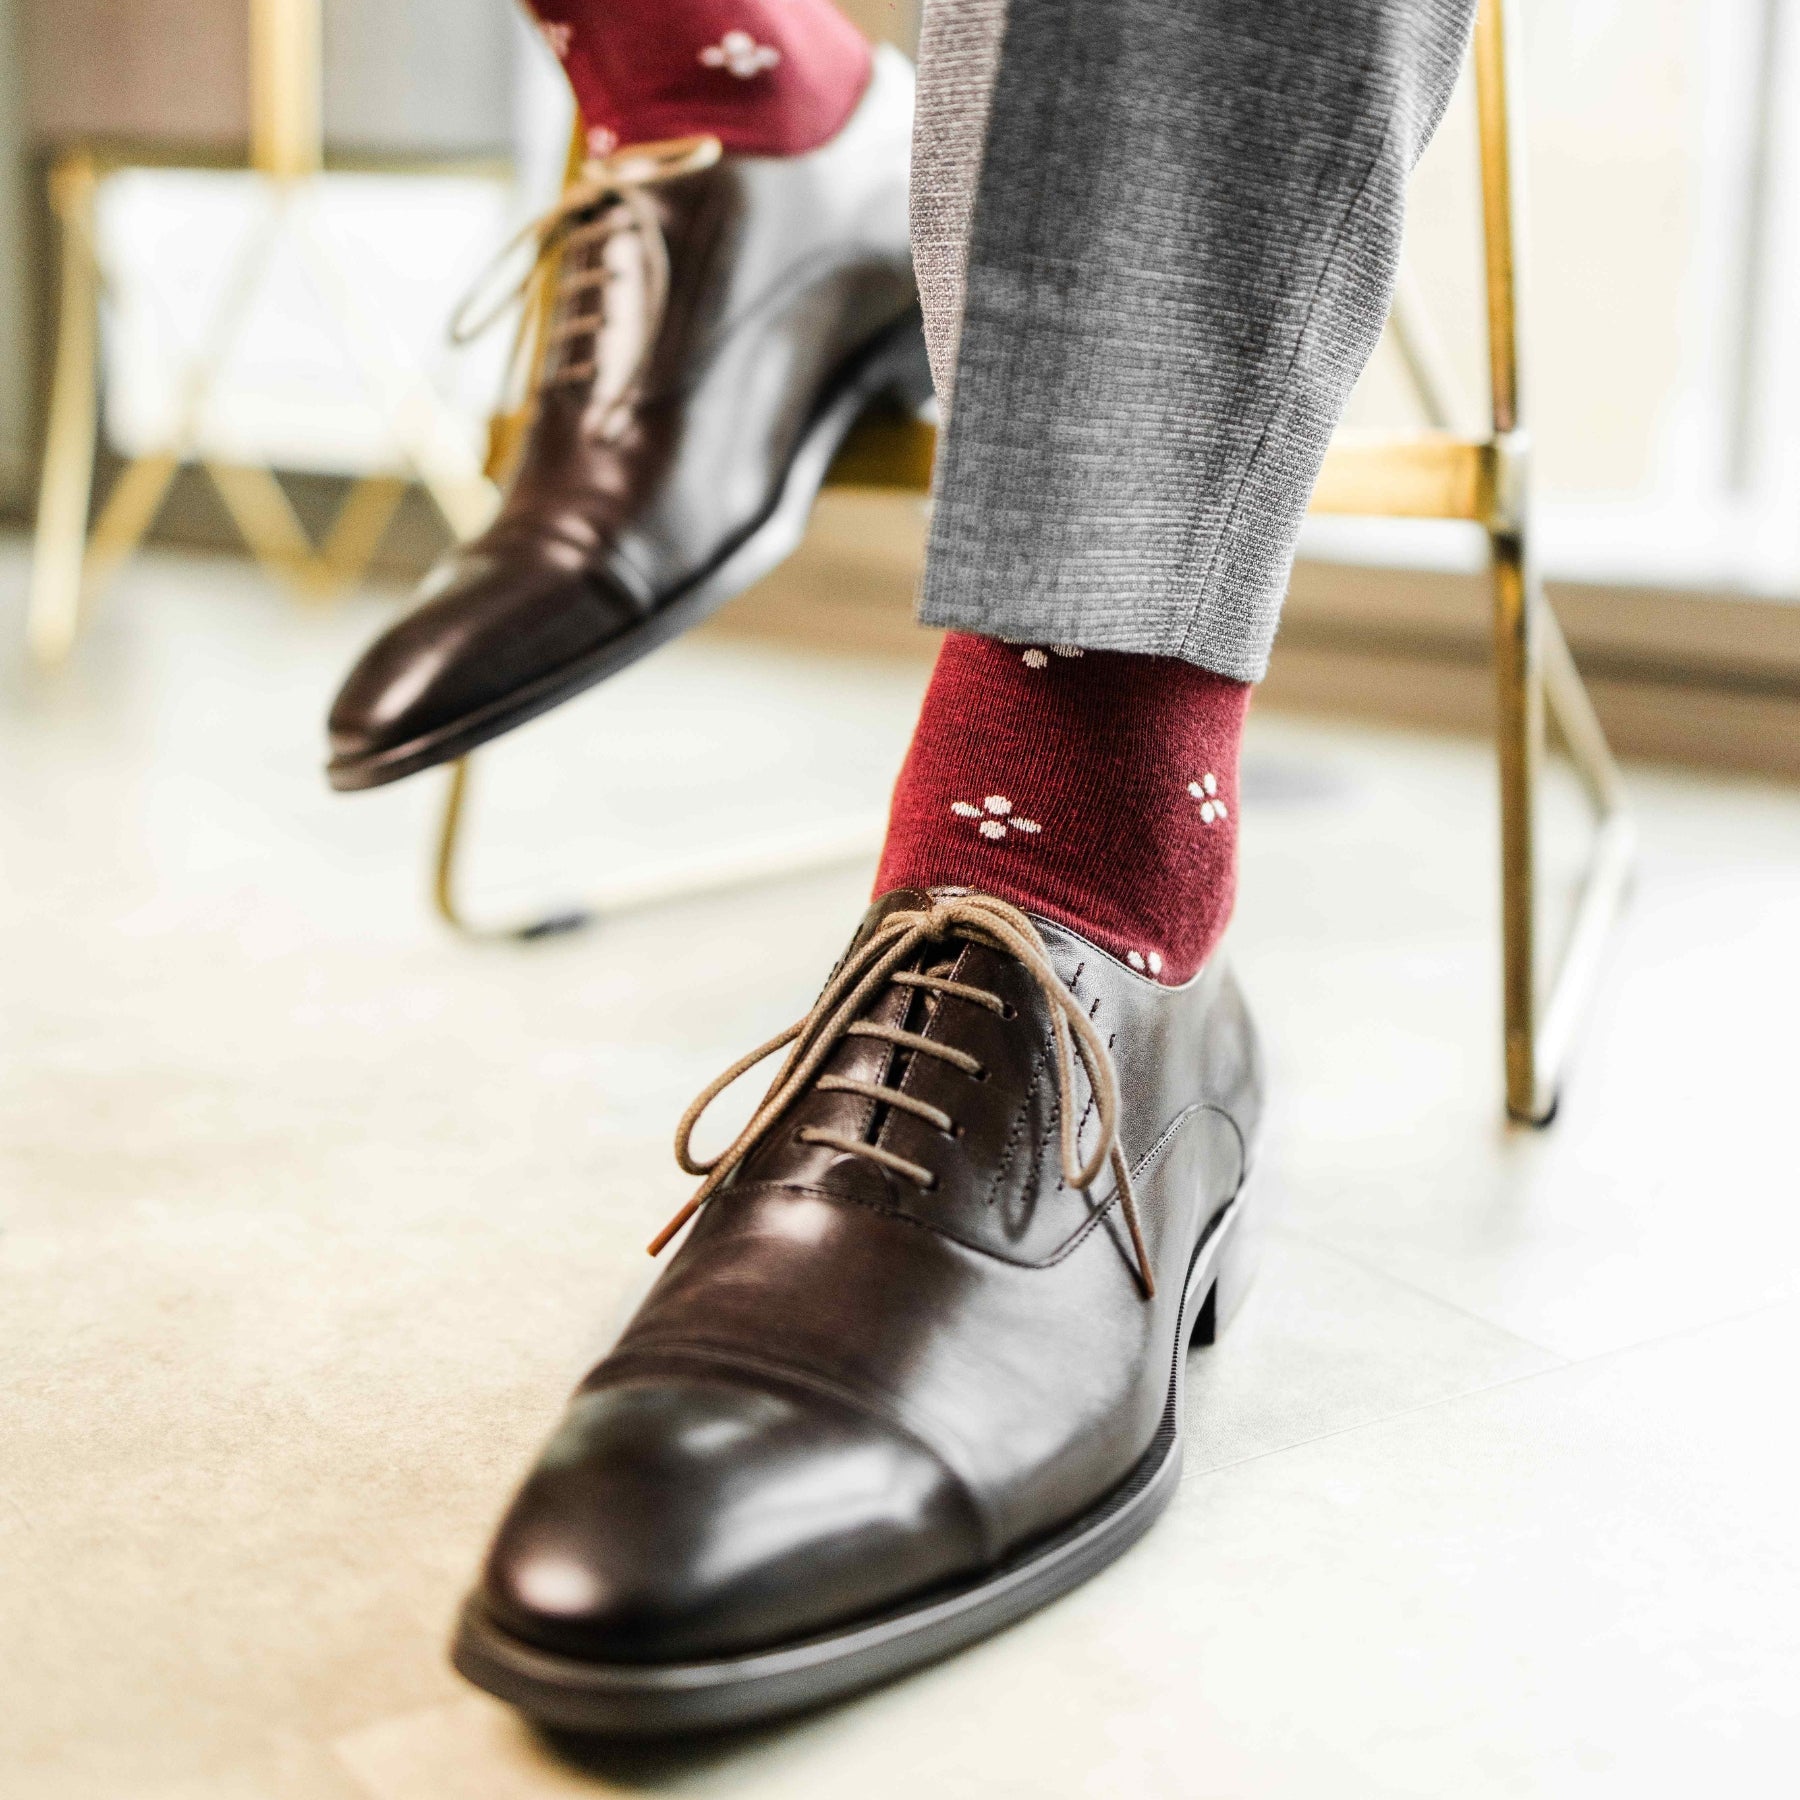 Cranberry Red men's dress sock with a white flower pattern